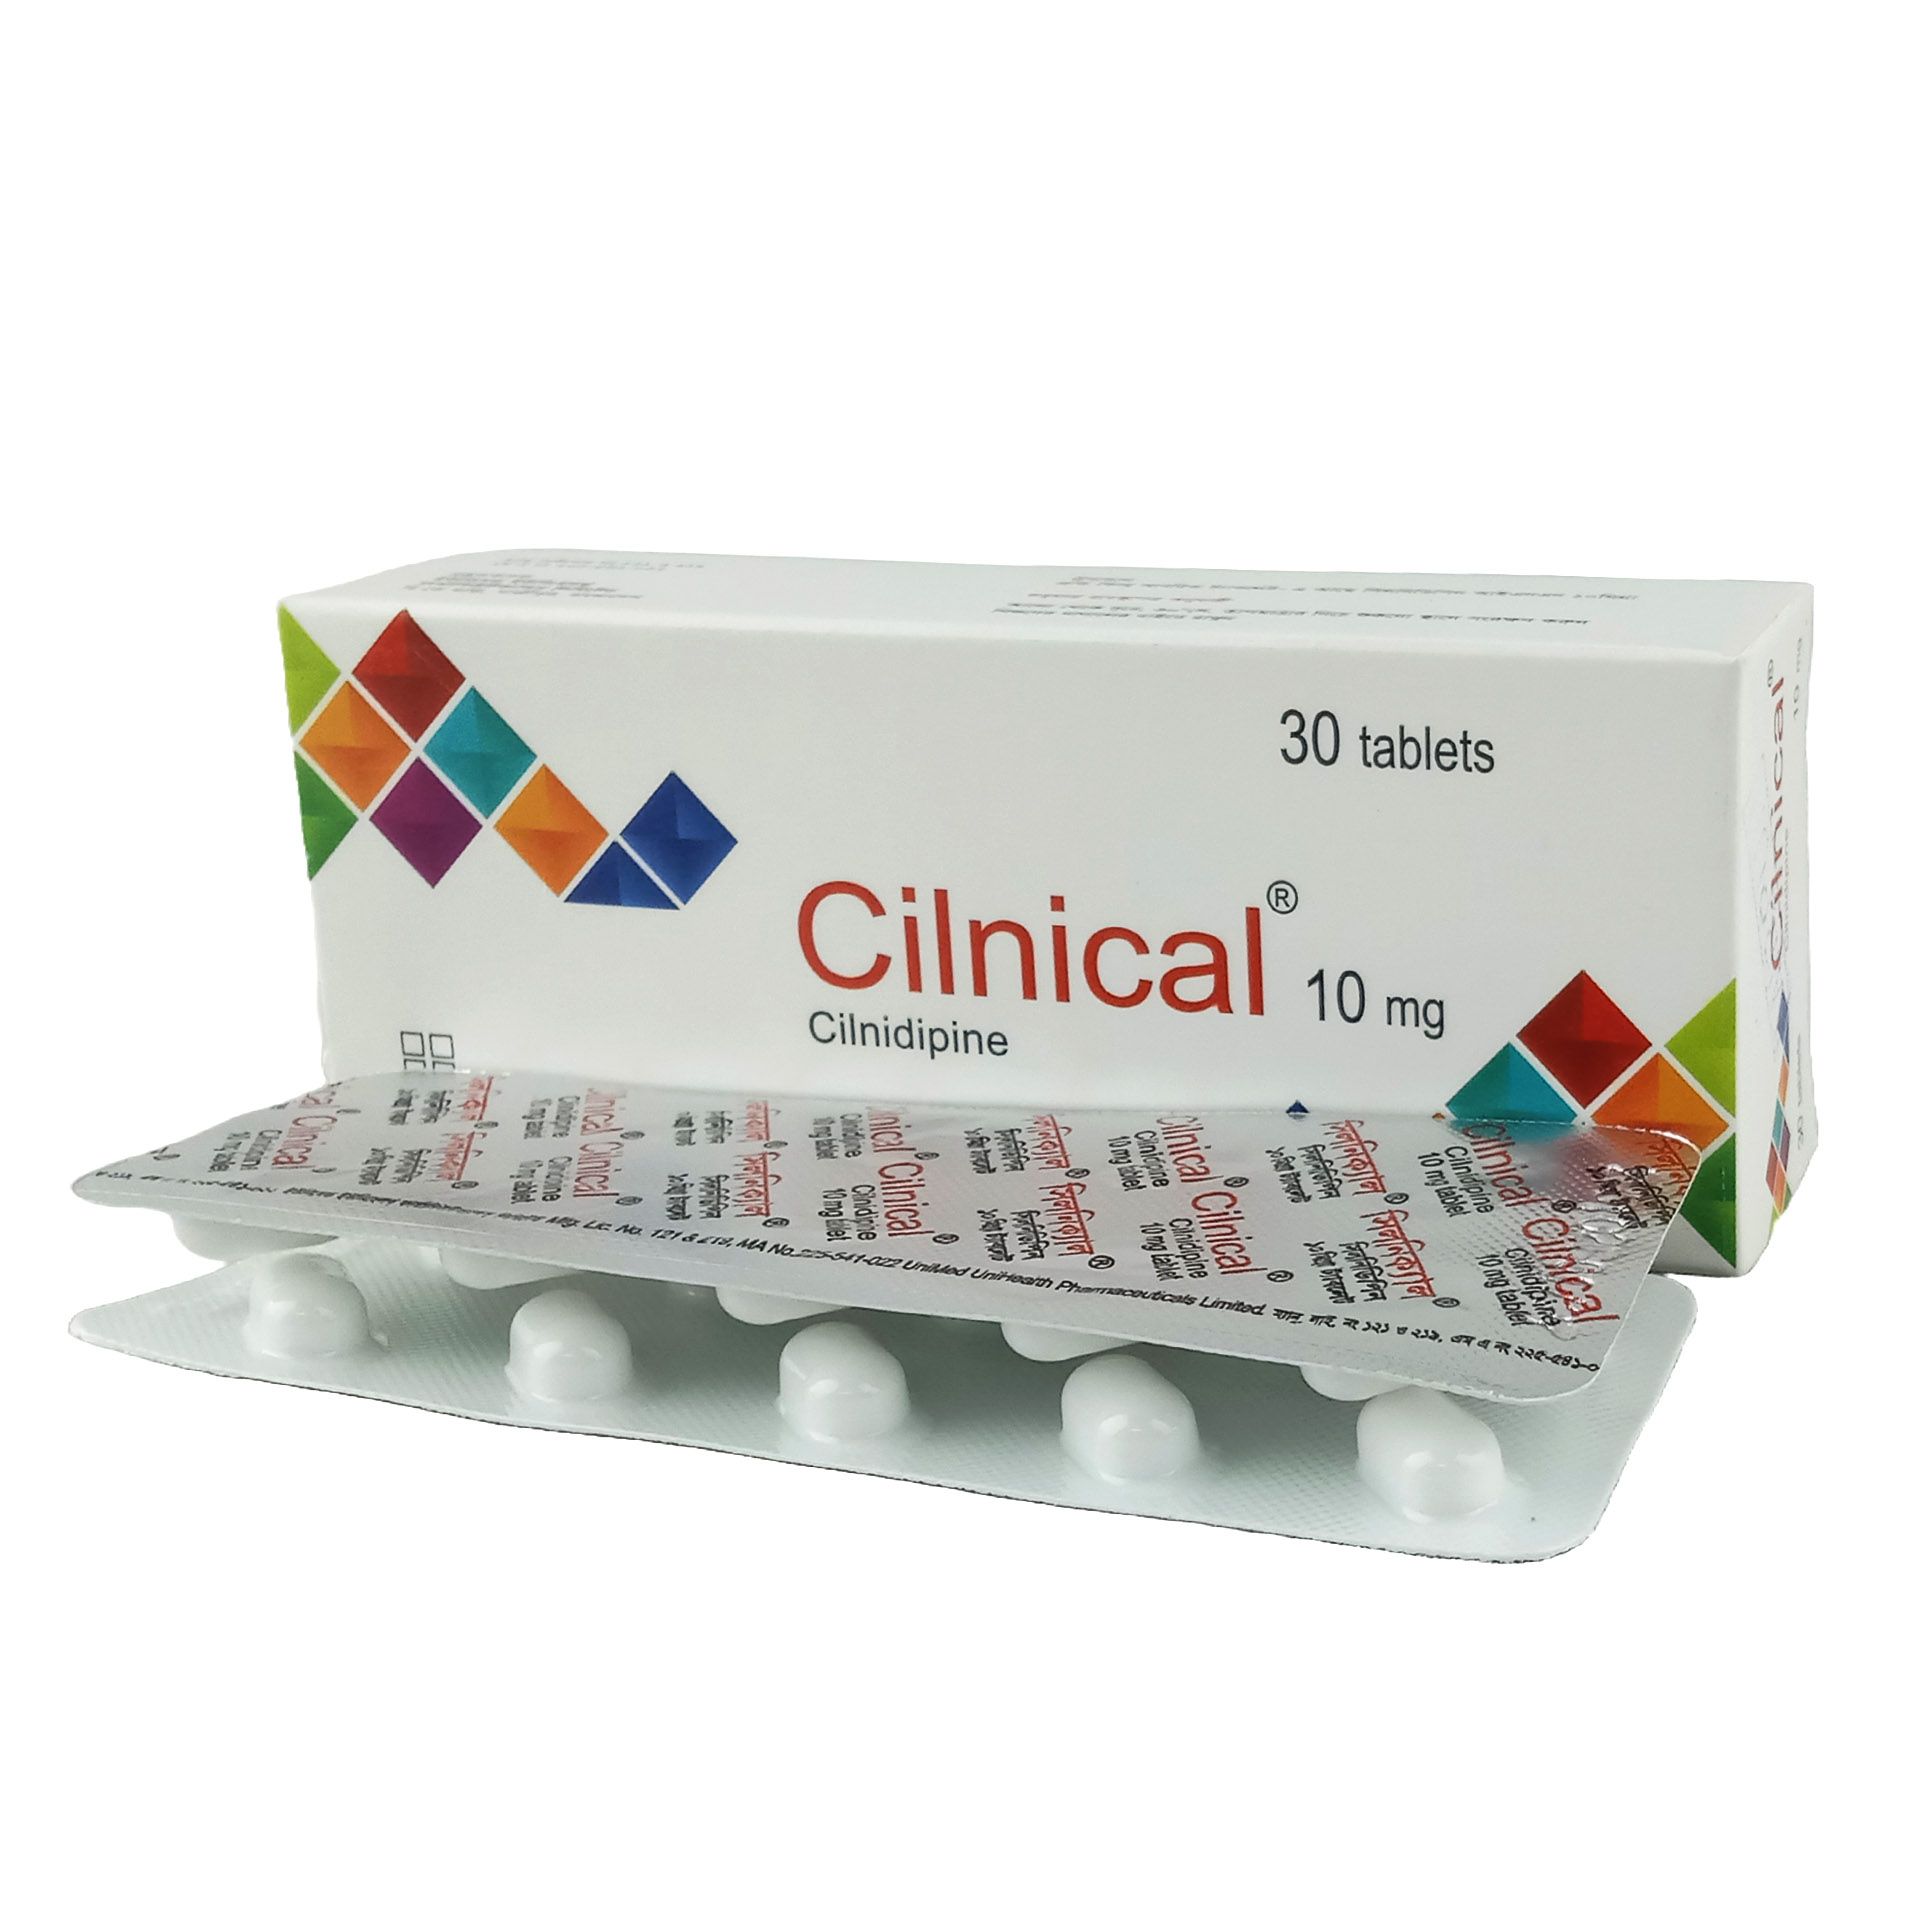 Cilnical 10mg Tablet